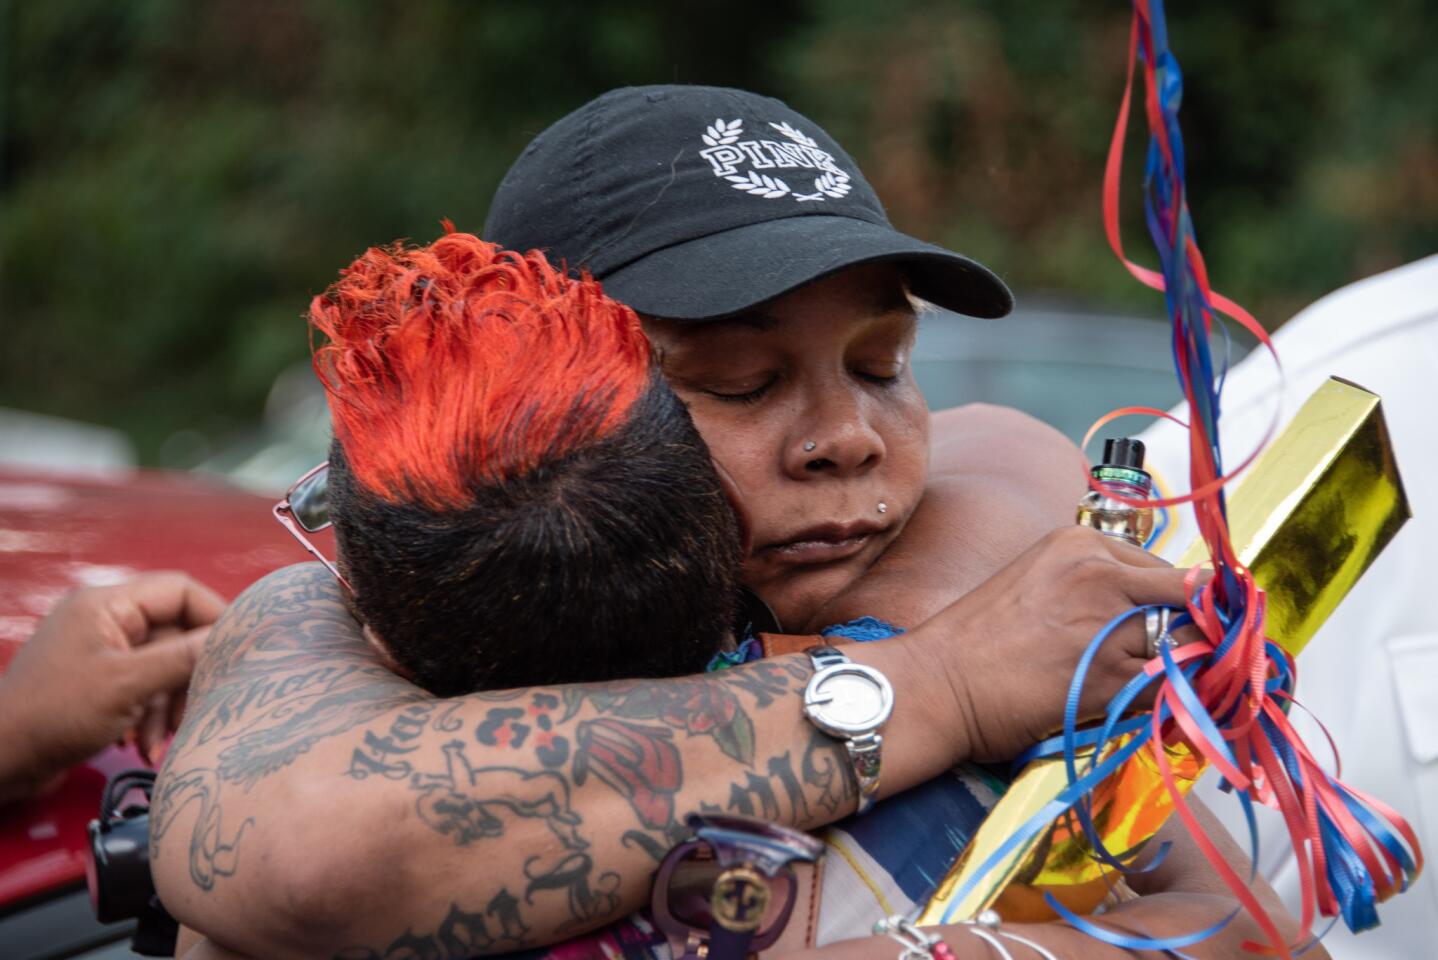 Jil Jackson, Malachi's former foster mother, received many hugs at the vigil. A vigil was held for 4-year-old Malachi Lawson on Tuesday, August 6.